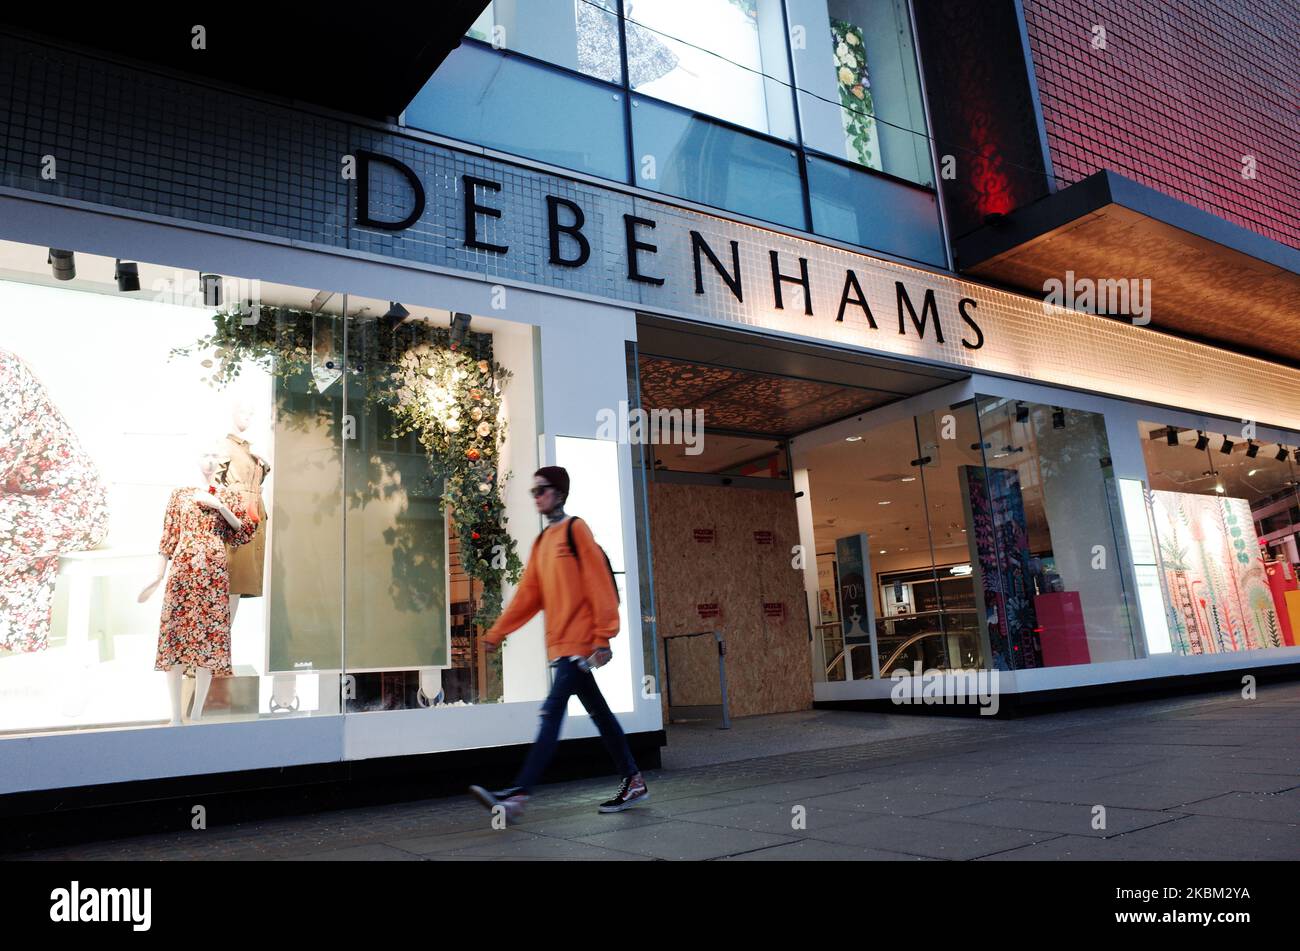 A woman walks past the boarded-up flagship branch of department store chain Debenhams on a near-deserted Oxford Street in London, England, on April 6, 2020. Debenhams announced today that it was having to file for administration as a consequence of having to shut all its stores across the UK under the covid-19 coronavirus lockdown. This is to be the second time in a year that the struggling retailer has filed for administration. Its present predicament comes not long after its permanent closure of 22 stores, resulting in more than 700 job losses, with a further 28 already slated for closure in Stock Photo